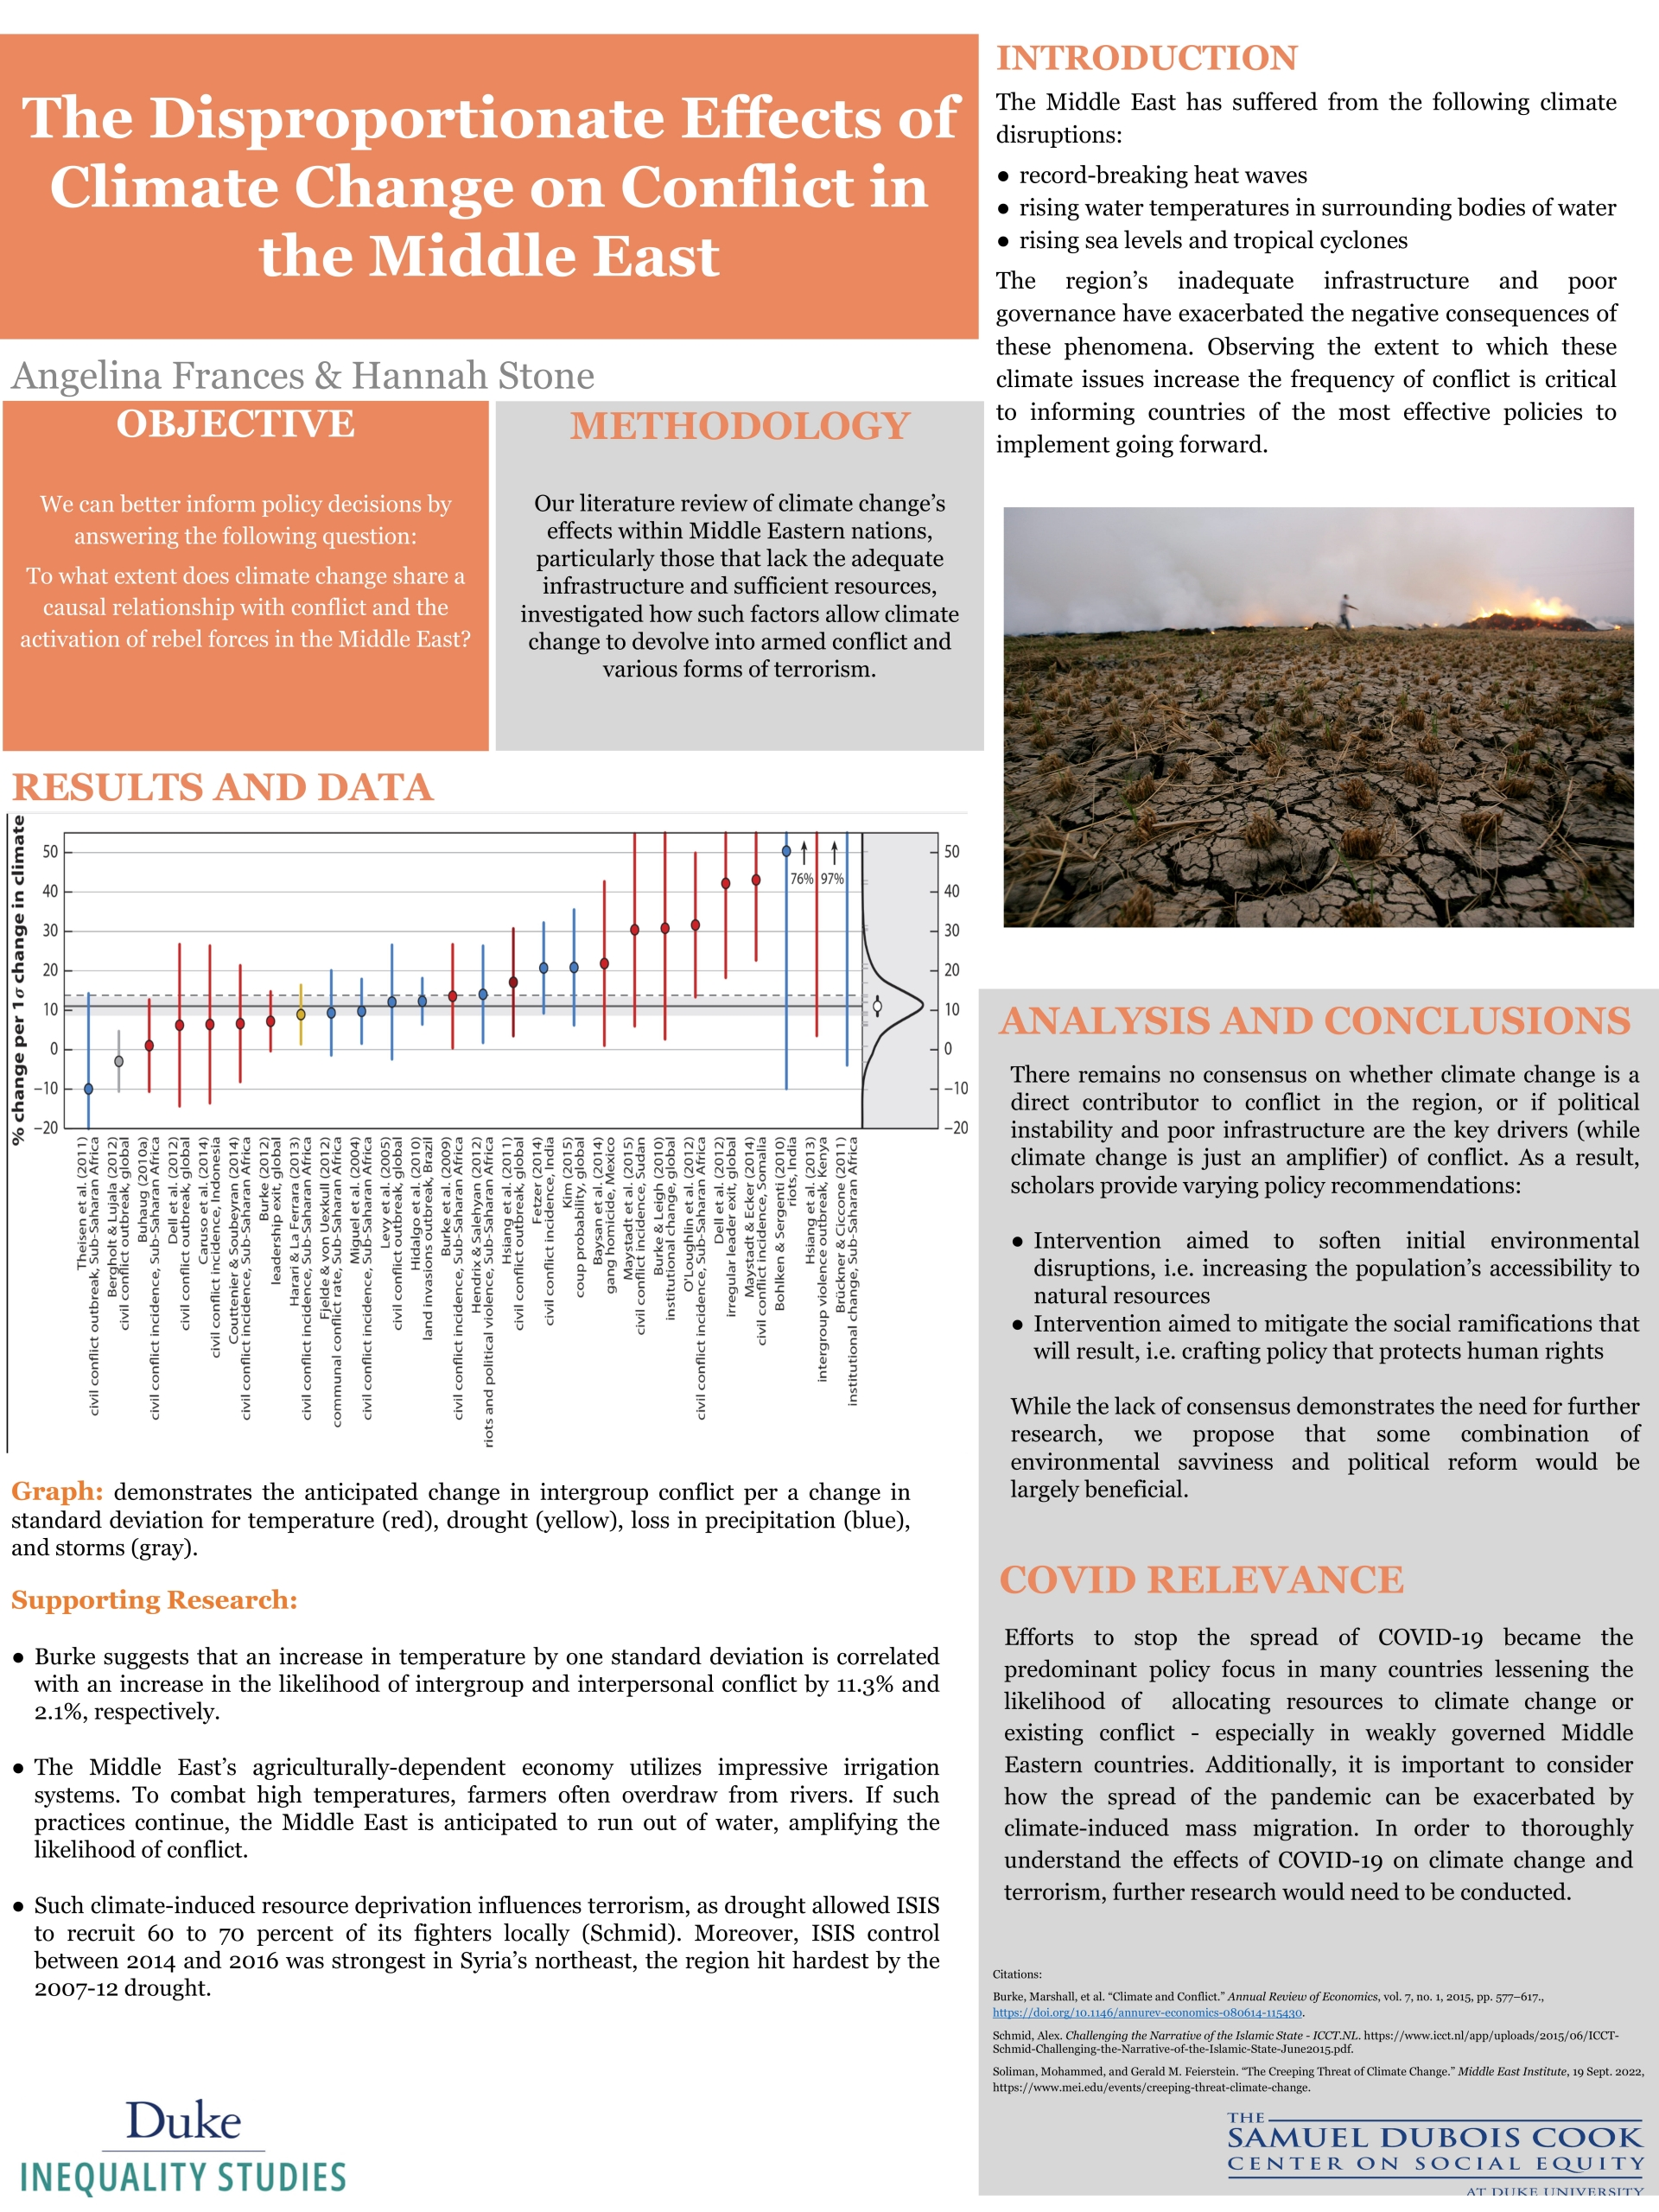 poster titled "the disproportionate effects of climate change on conflict in the middle east"